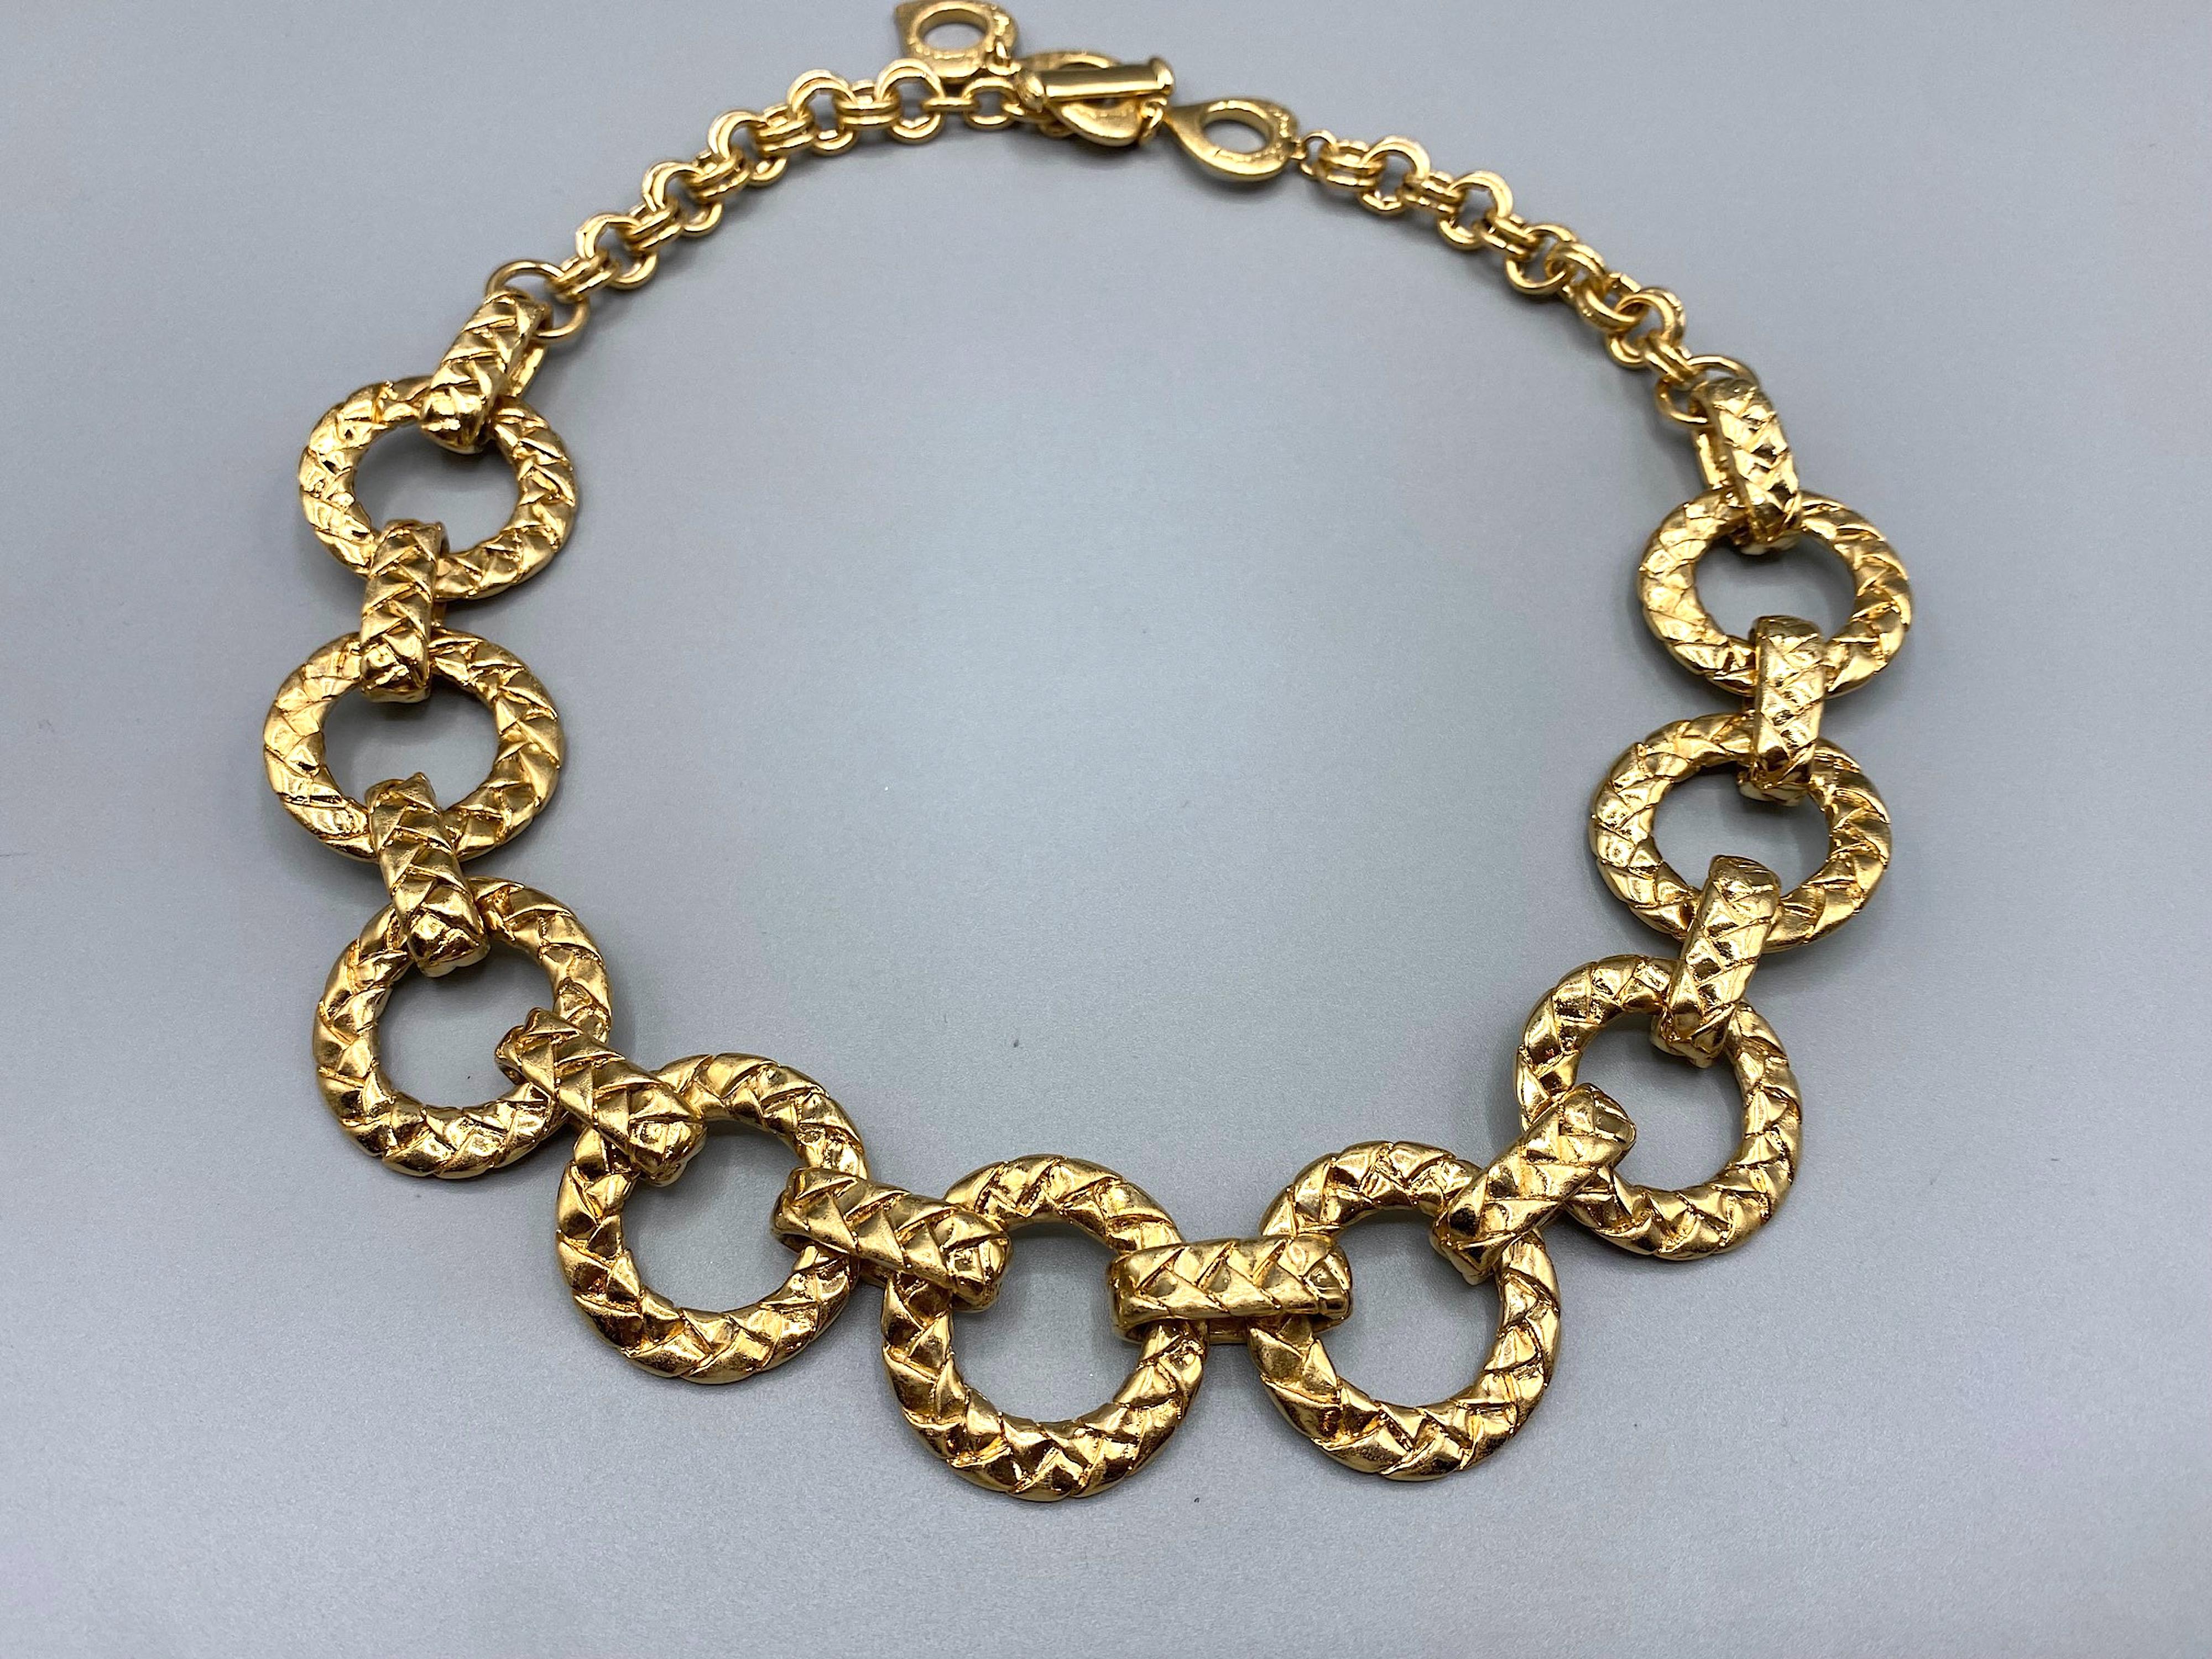 Yves Saint Laurent 1980's Round Quilt Link Chain Necklace For Sale 2